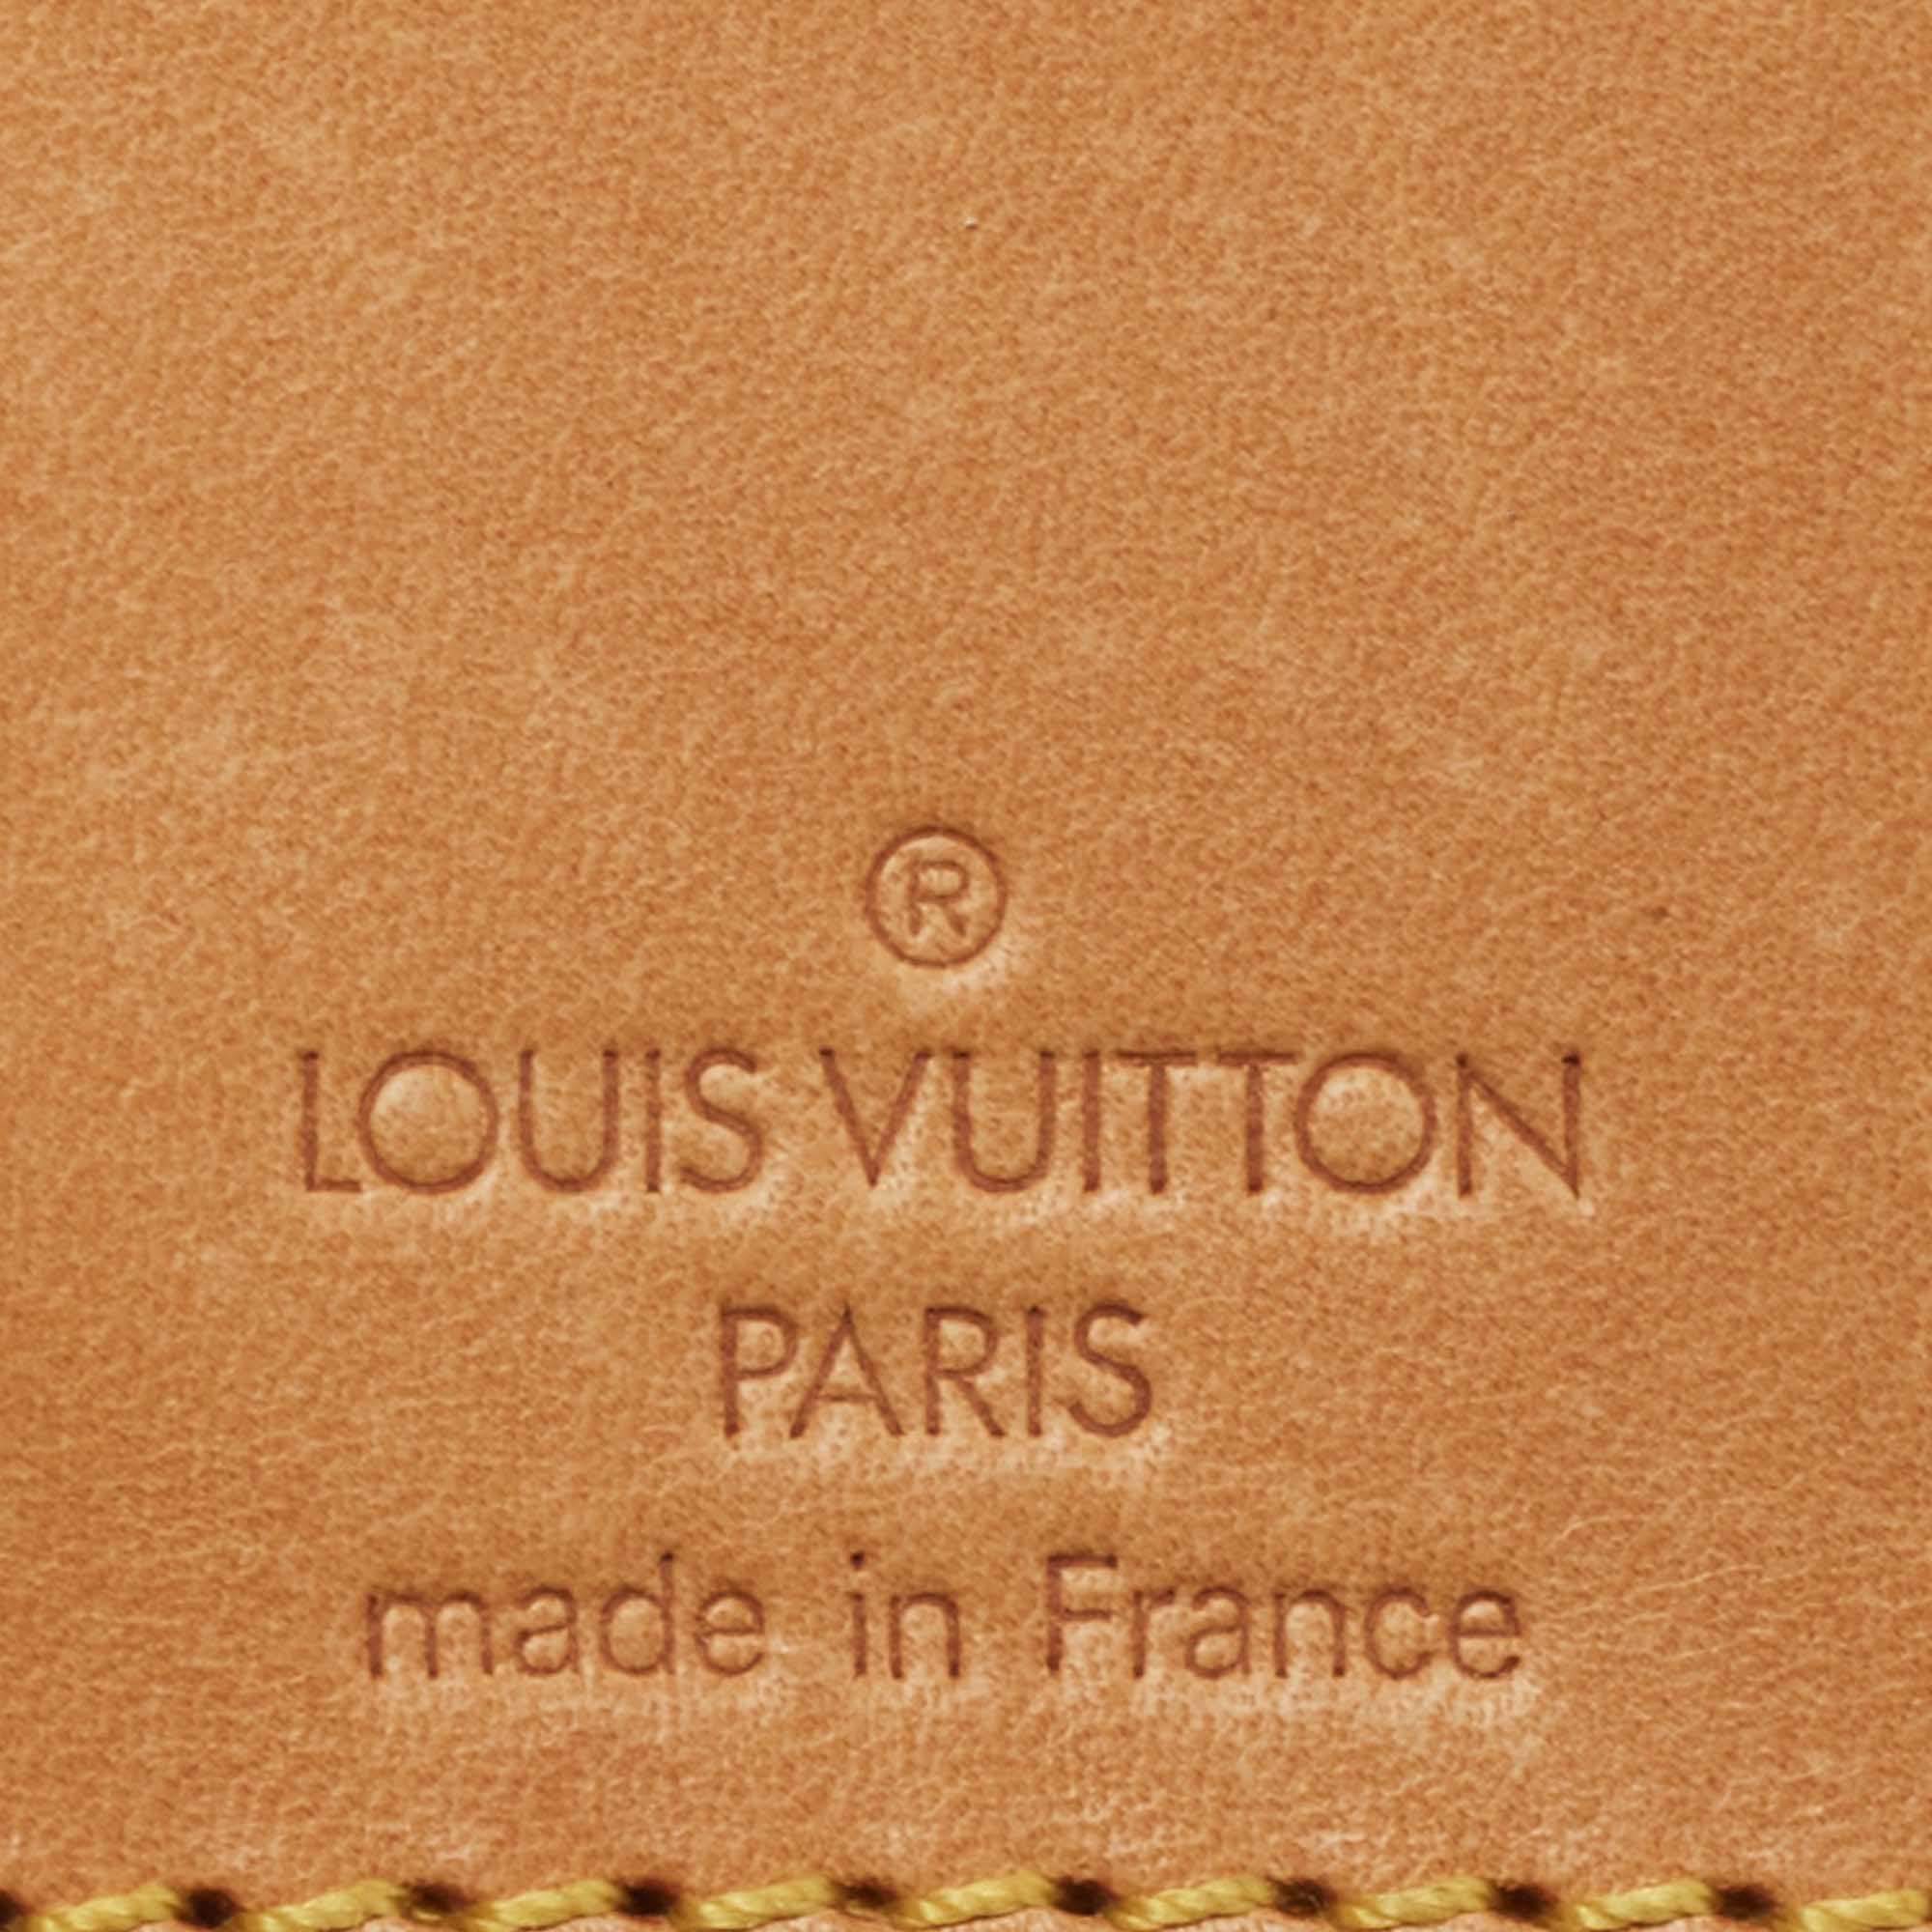 LOUIS VUITTON Name Tag 5 Set Brown Leather Bag Accessories Authentic 65048